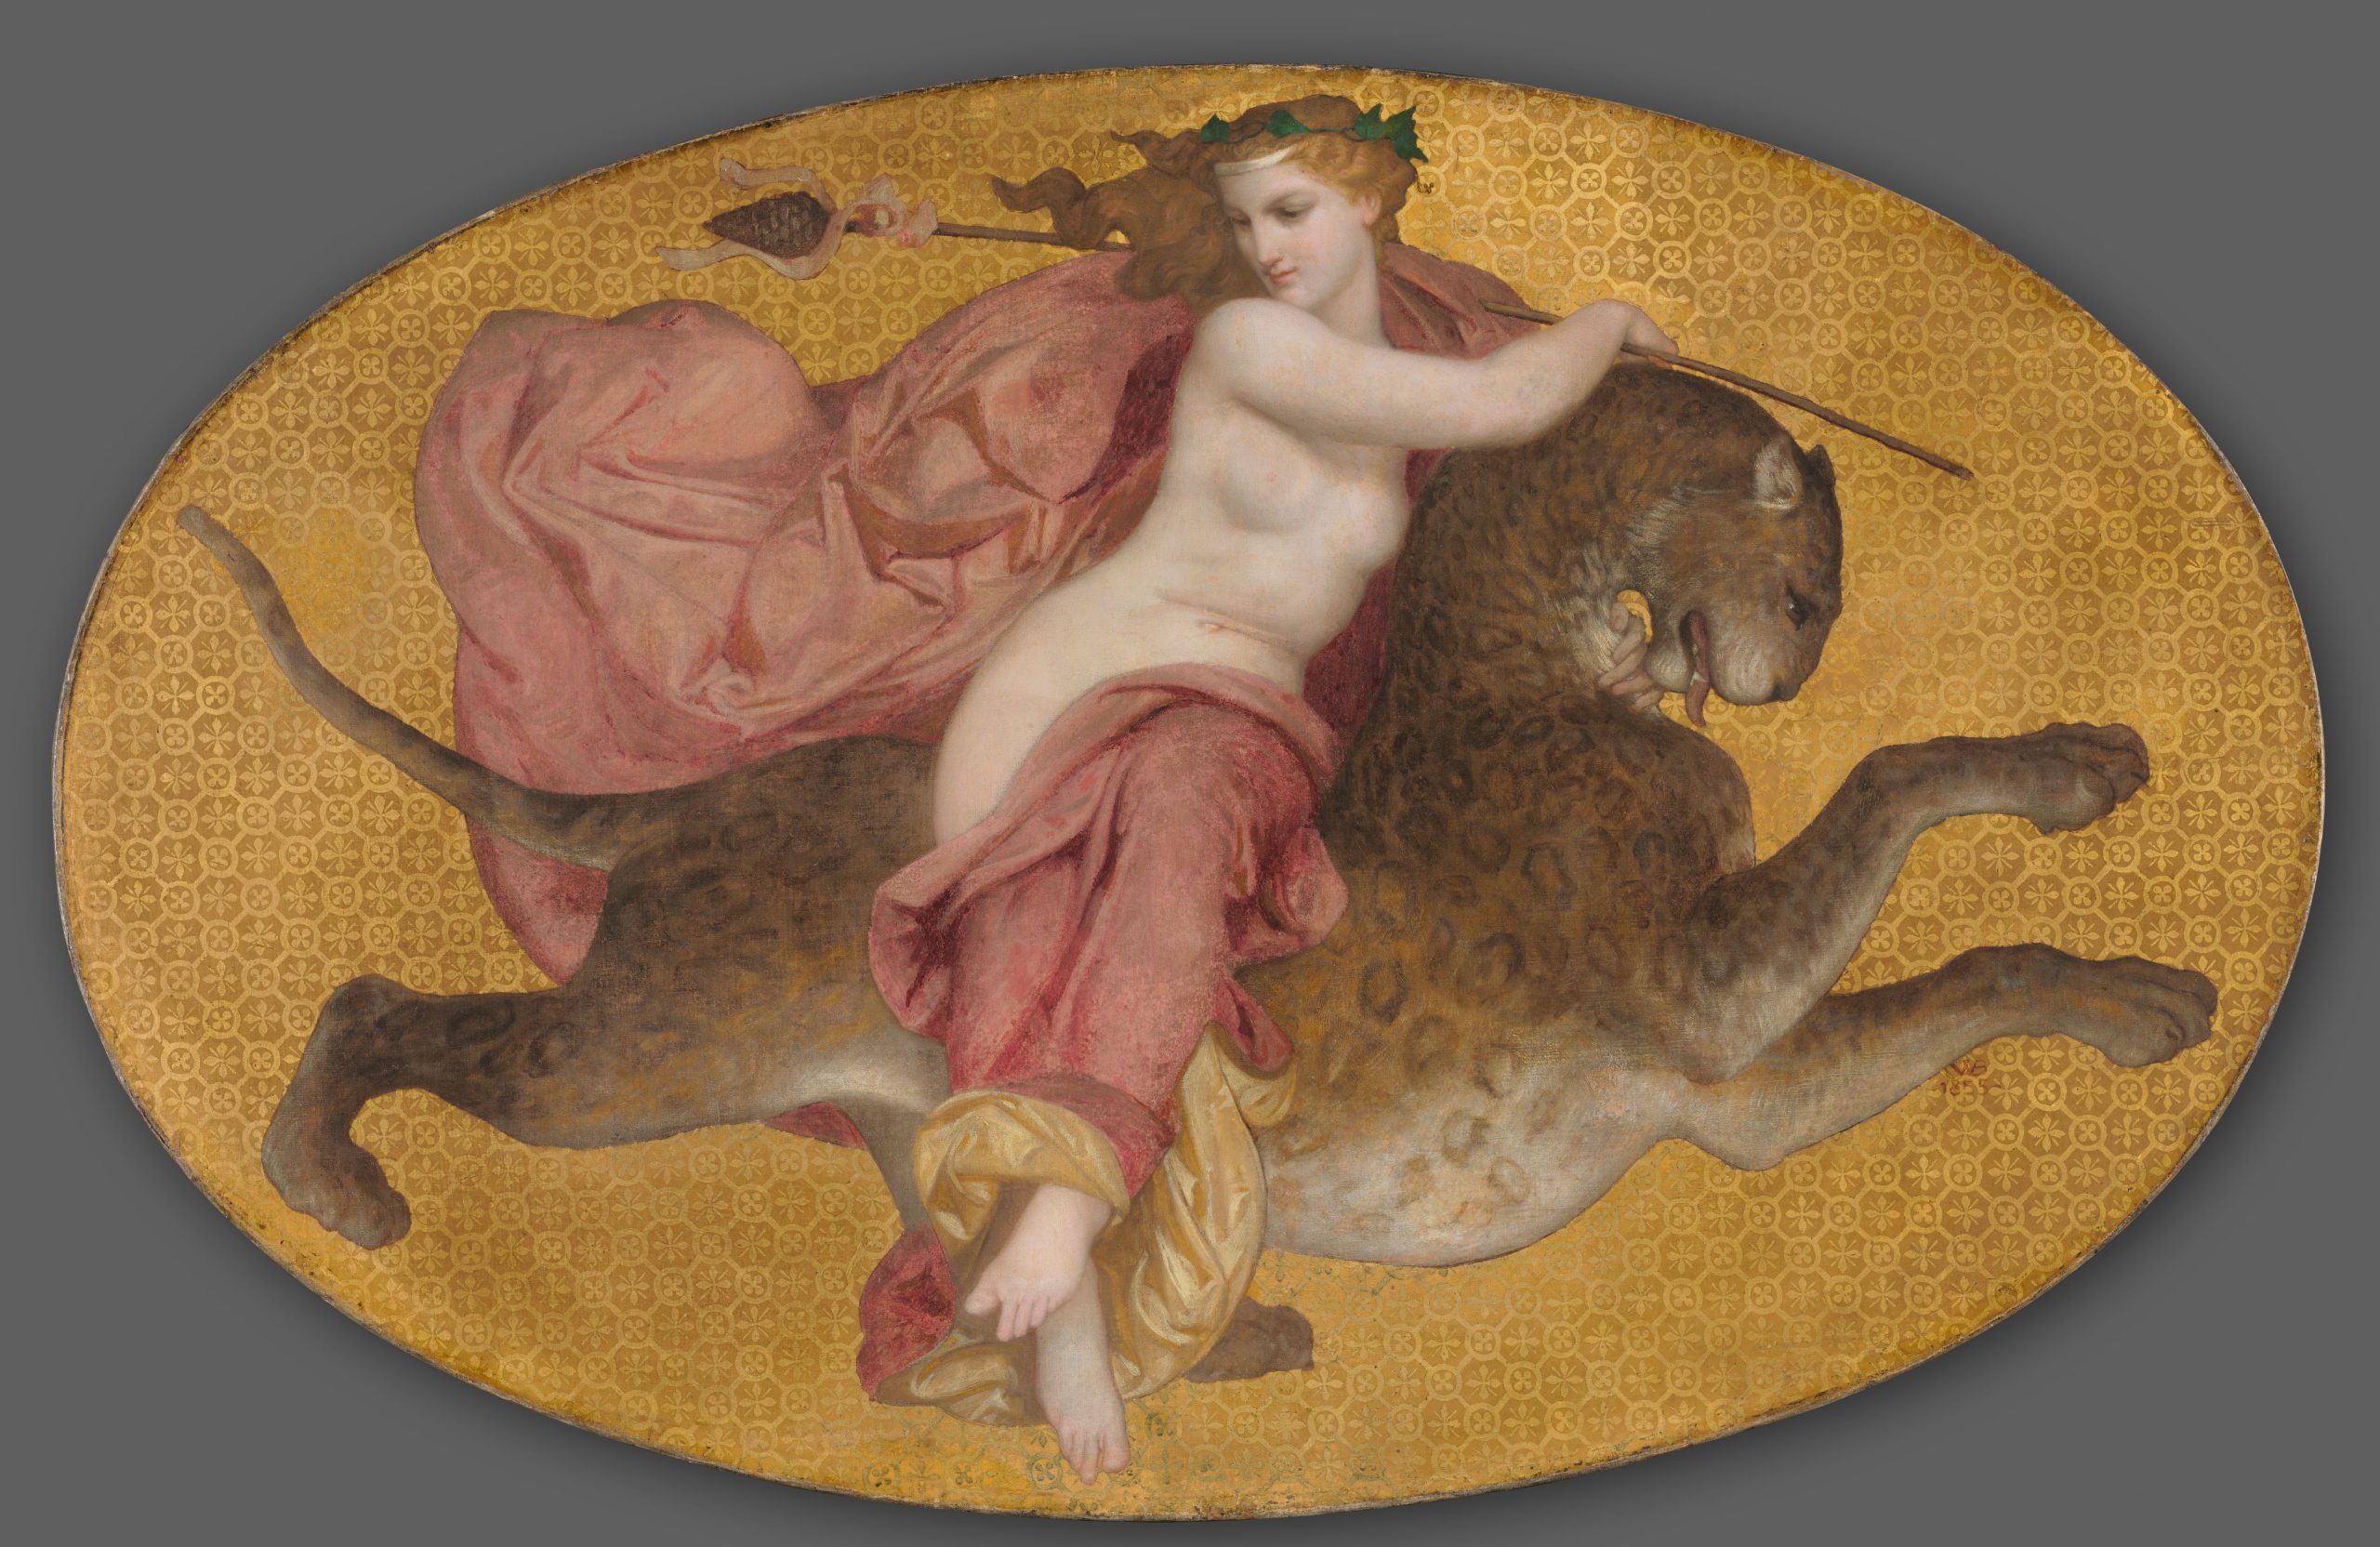 A bare chested woman sits on top of a panther against a gold background.